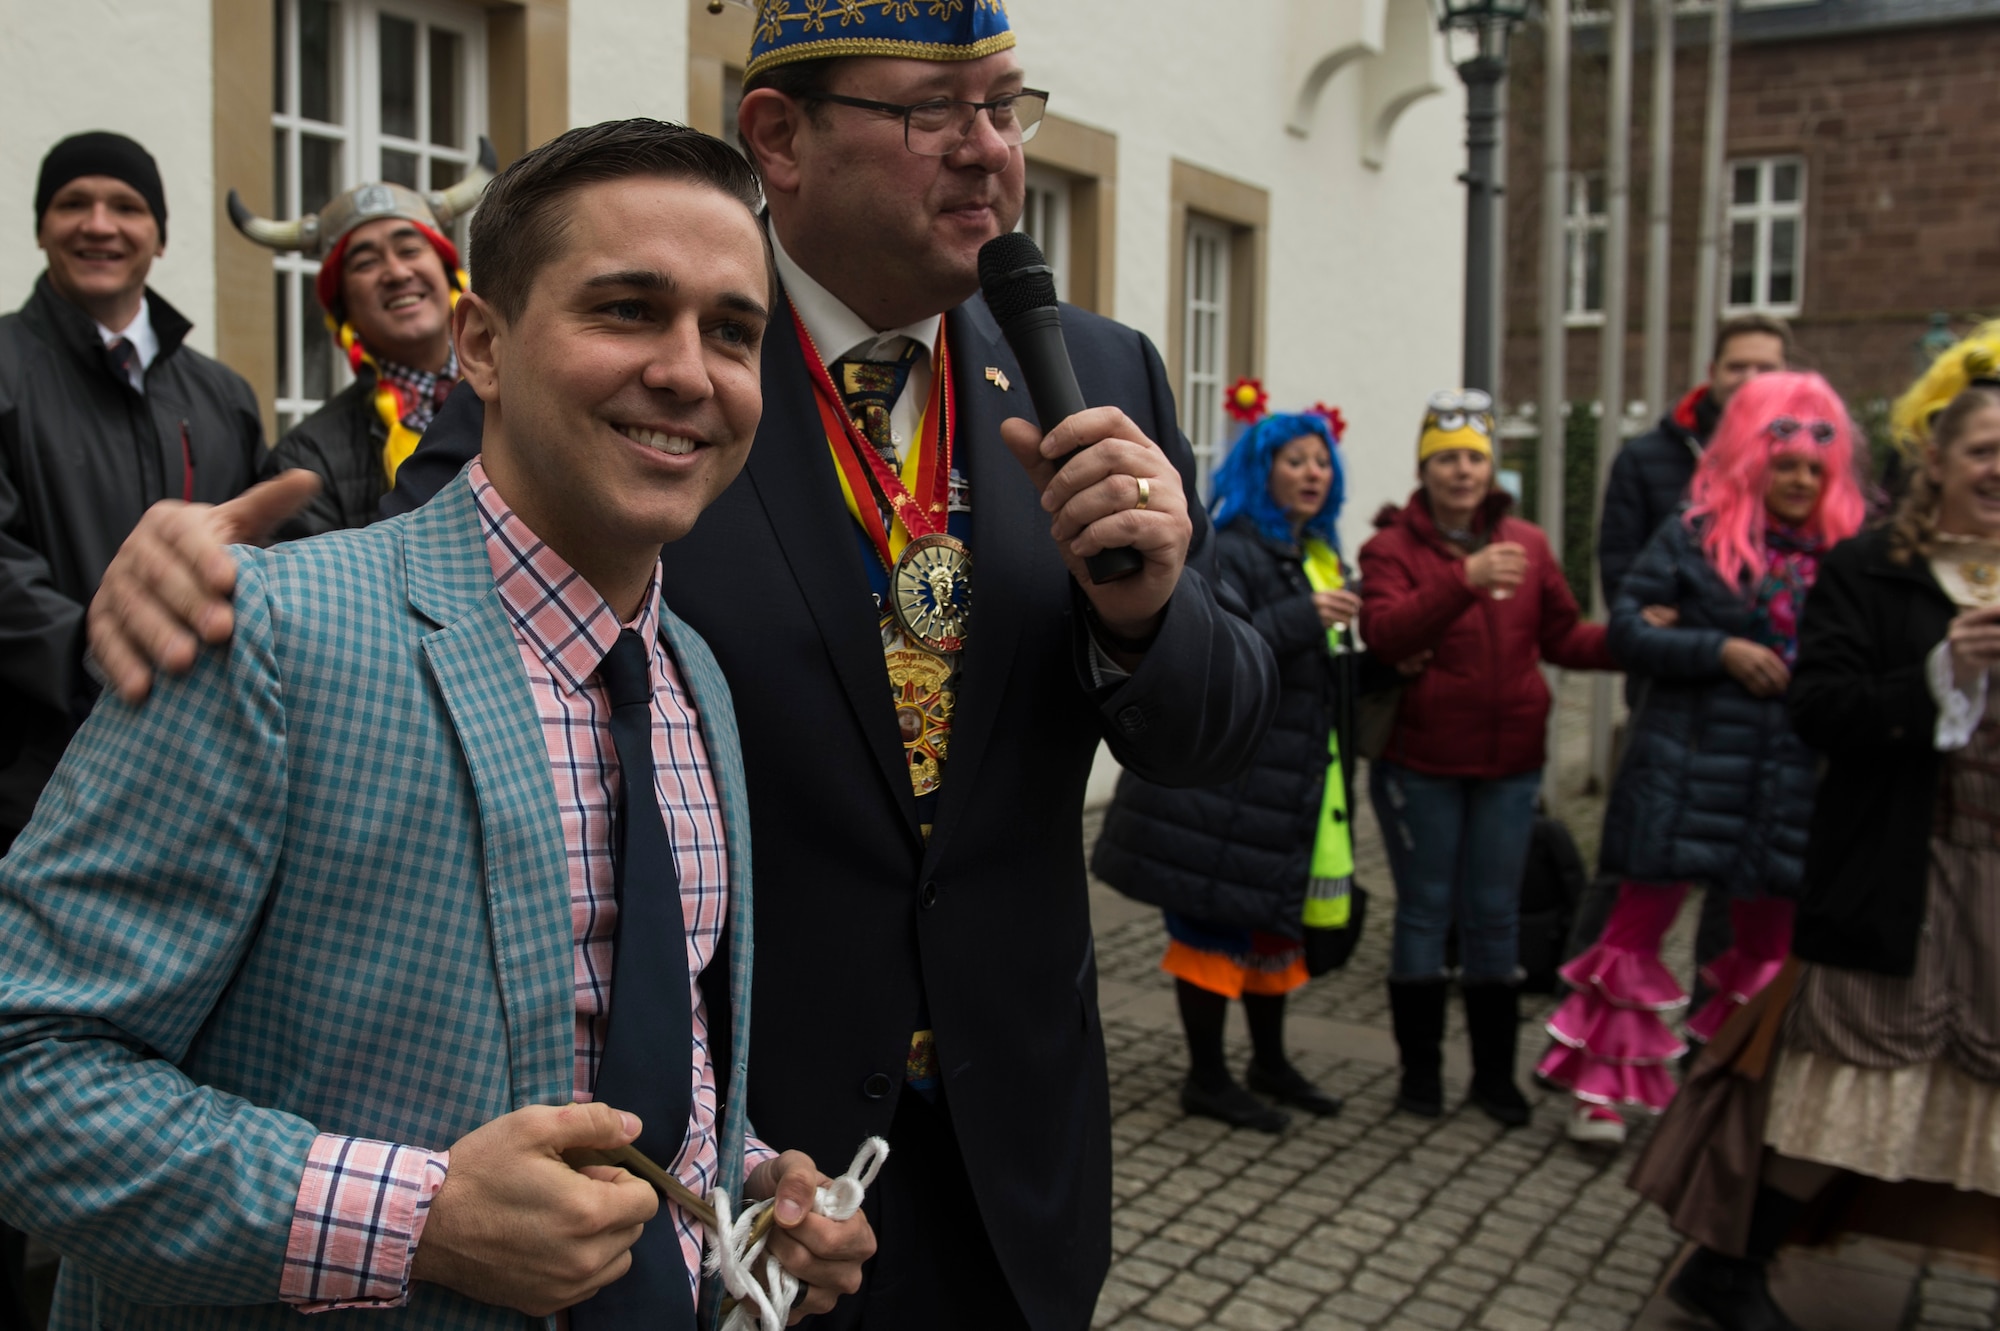 Airman 1st Class Preston Cherry, 52nd Fighter Wing Public Affairs photojournalist, is presented with a key by Joachim Kandels, Bitburg mayor, during the 2017 Storming of the Rathaus Fasching event in Bitburg, Germany, Feb. 23, 2017. The women captured the key, symbolizing they had taken control of the city as part of the holidays tradition. (U.S. Air Force photo by Senior Airman Dawn M. Weber)